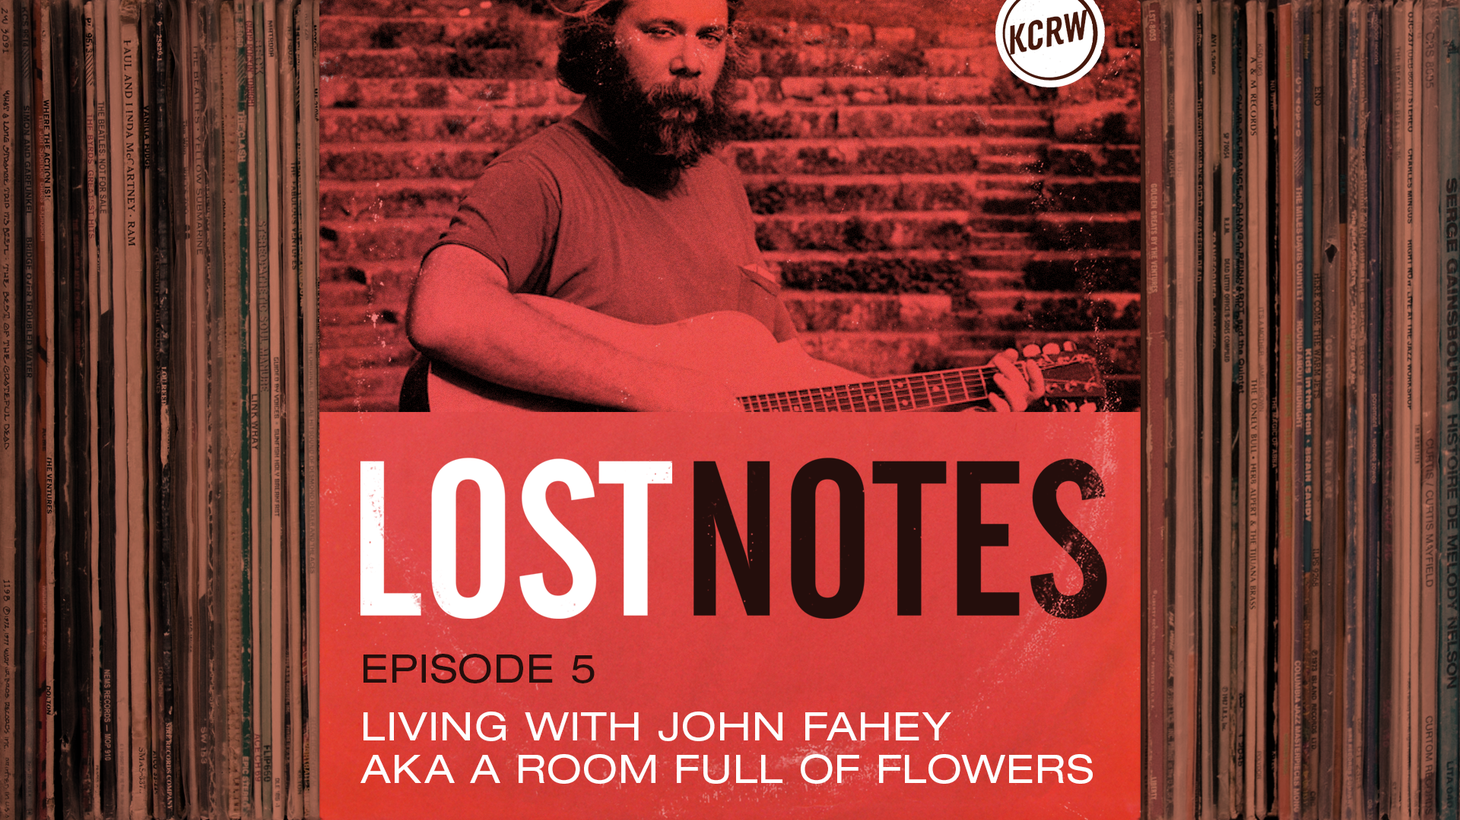 John Fahey’s guitar playing influenced the sound of the American underground for generations. But how does that legacy change when you hear from three of the women who knew him best?